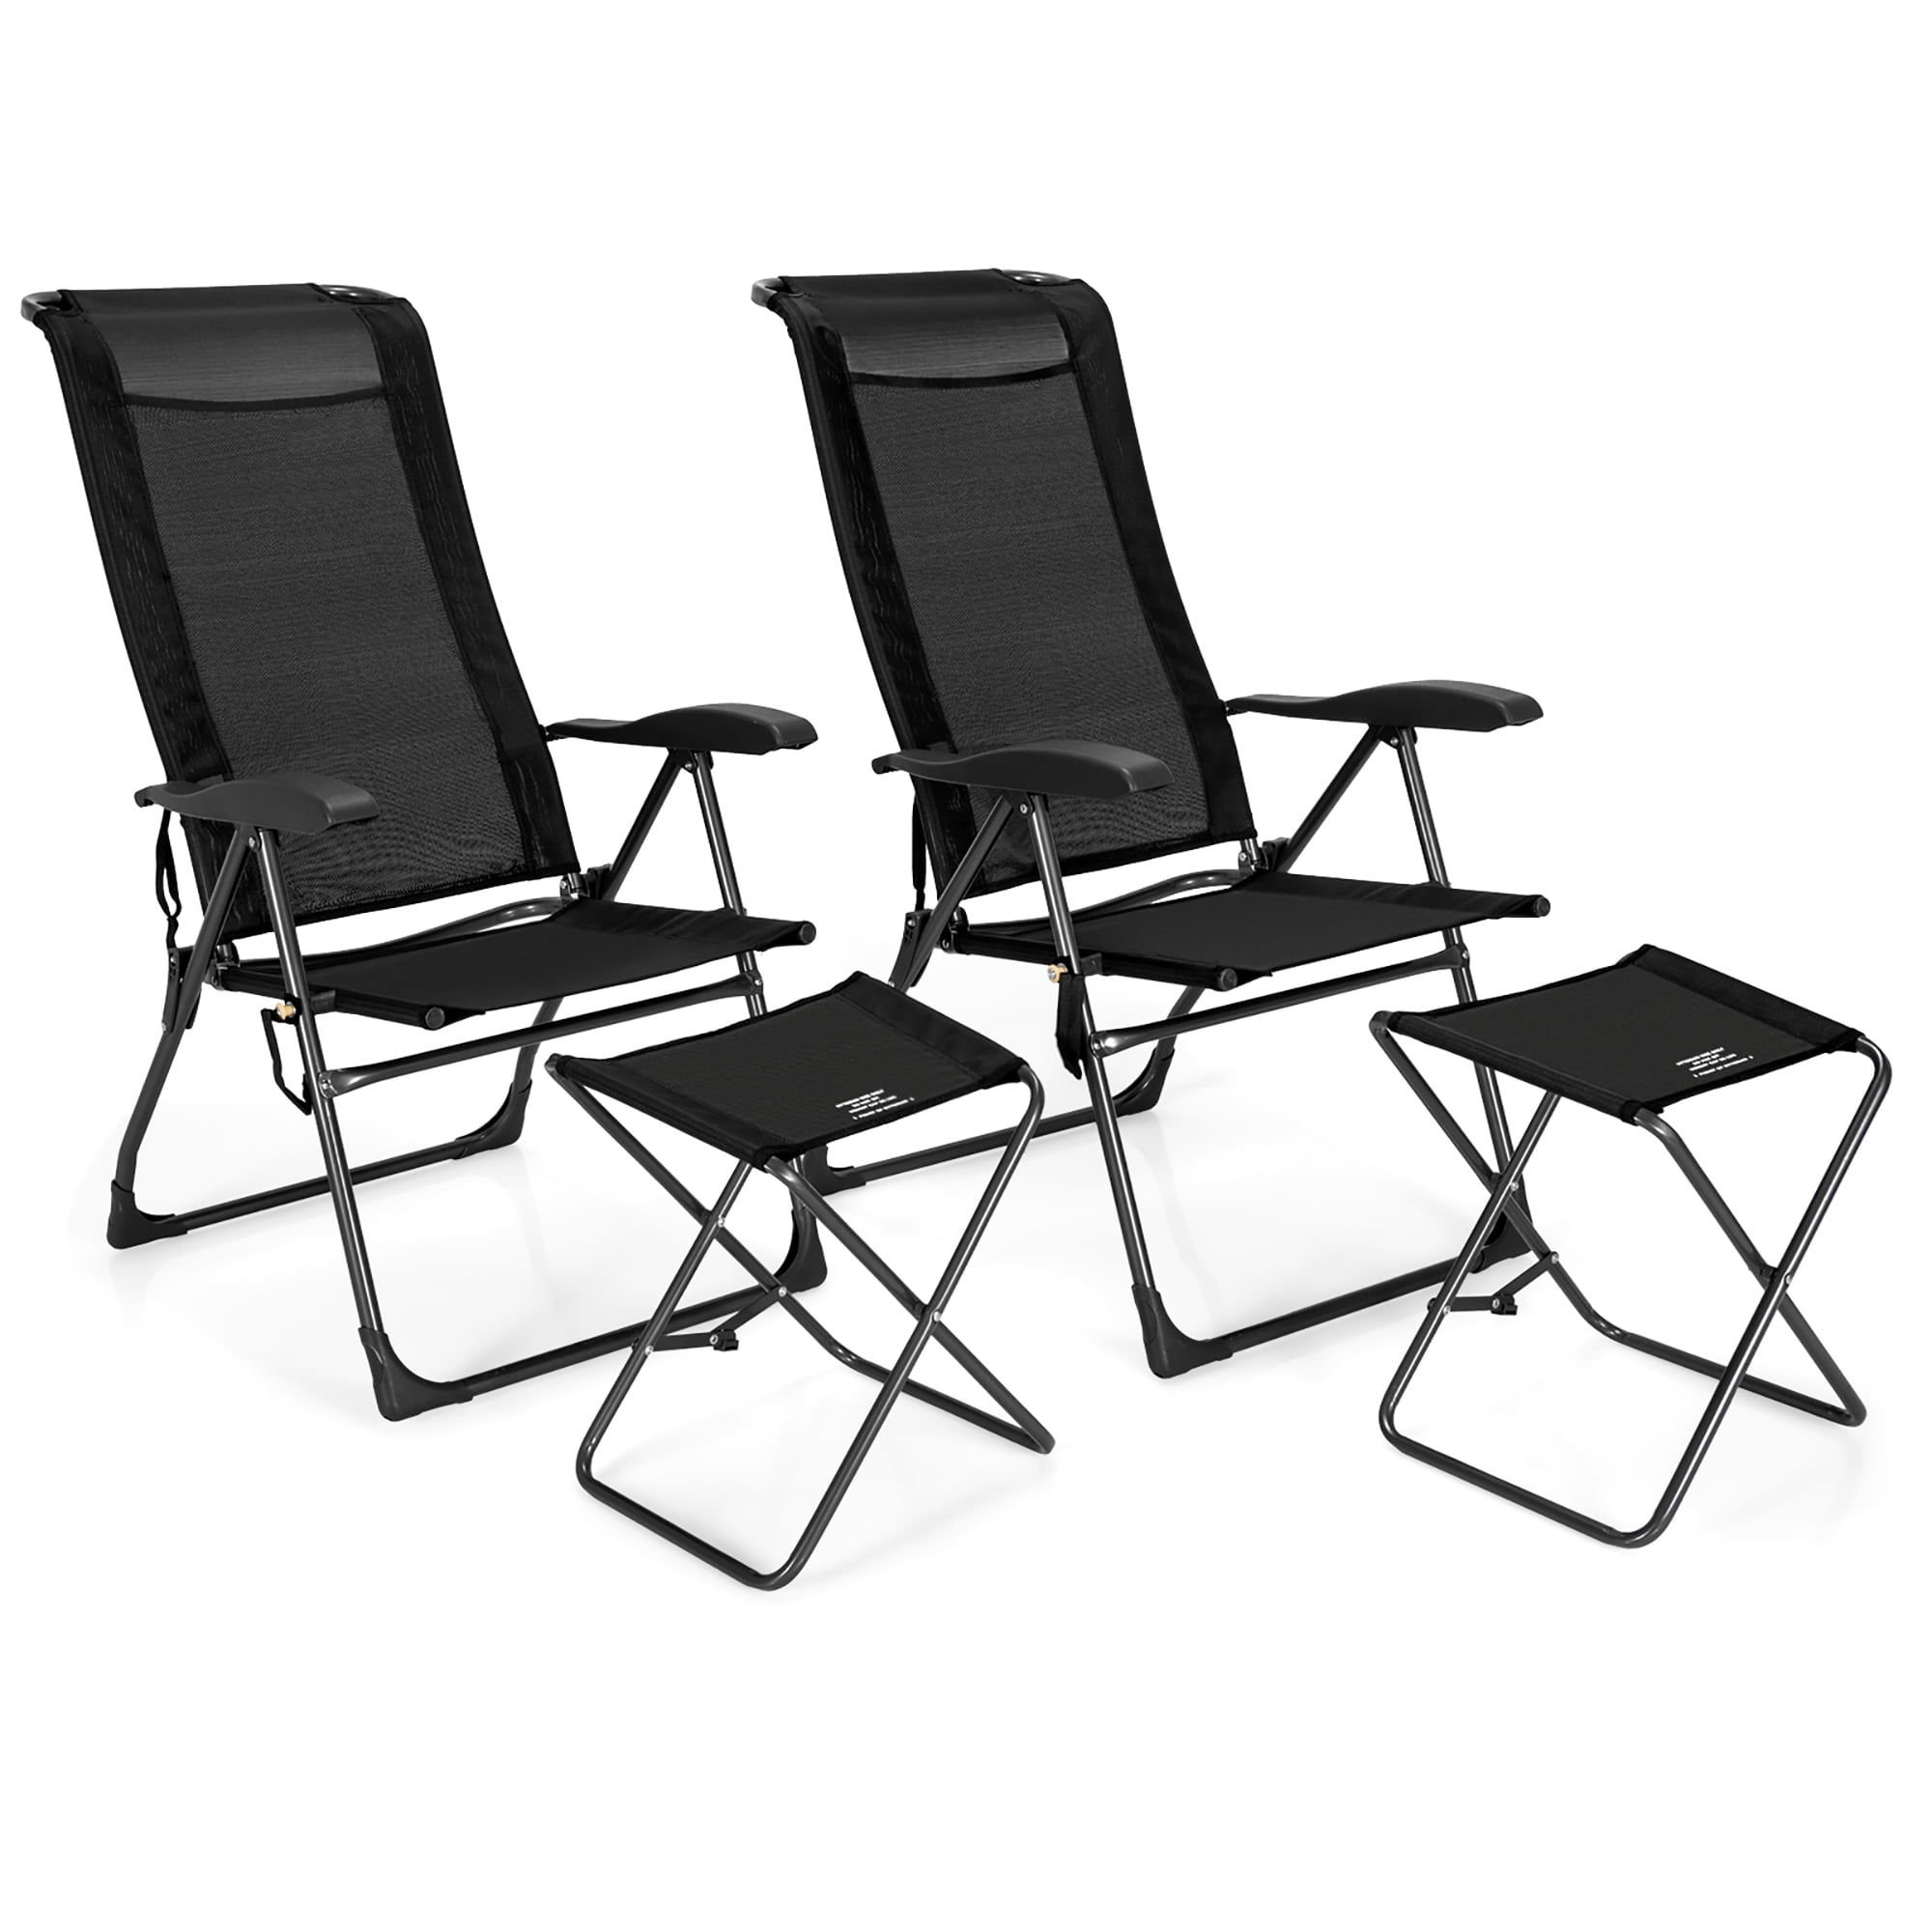 Costway 4PCS Patio Folding Dining Chair Recliner Adjustable Camping Portable